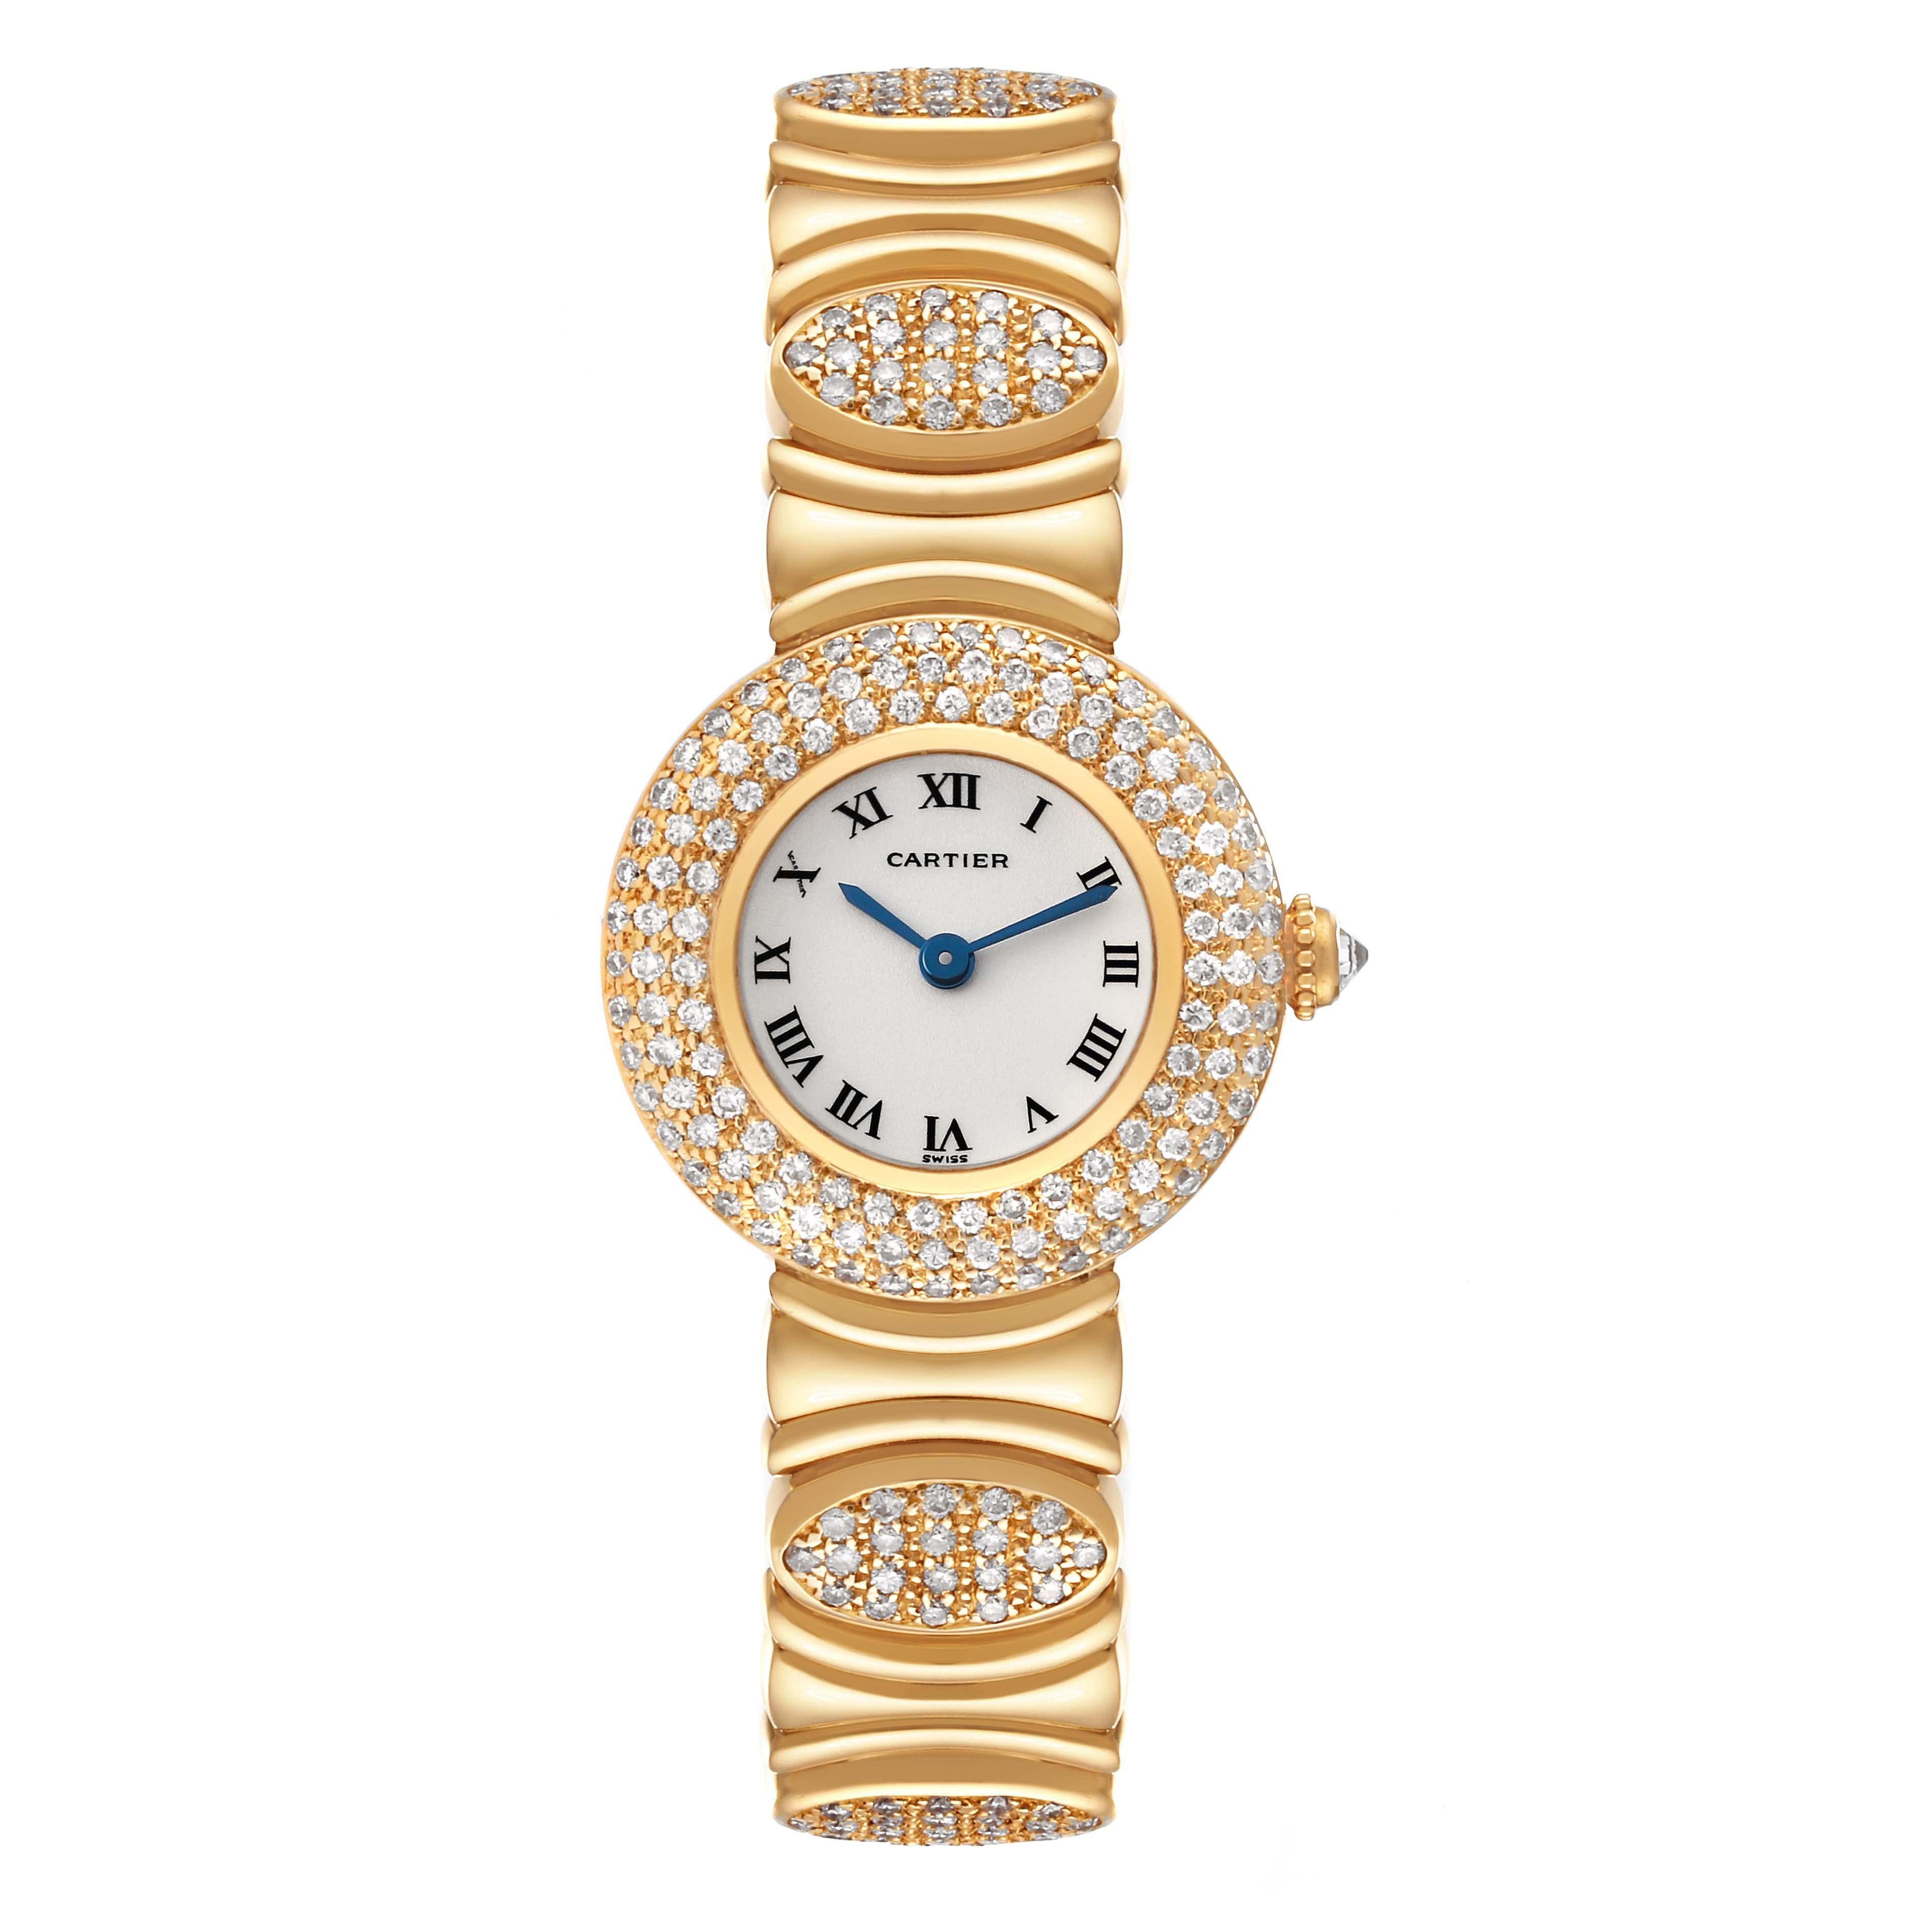 Cartier Colisee Clasque d'Or Yellow Gold Silver Dial Diamond Ladies Watch. Quartz movement. 18k yellow gold case 23.8 mm in diameter. Circular grained crown set with an original Cartier factory diamond. 18K yellow gold original Cartier factory  pav?